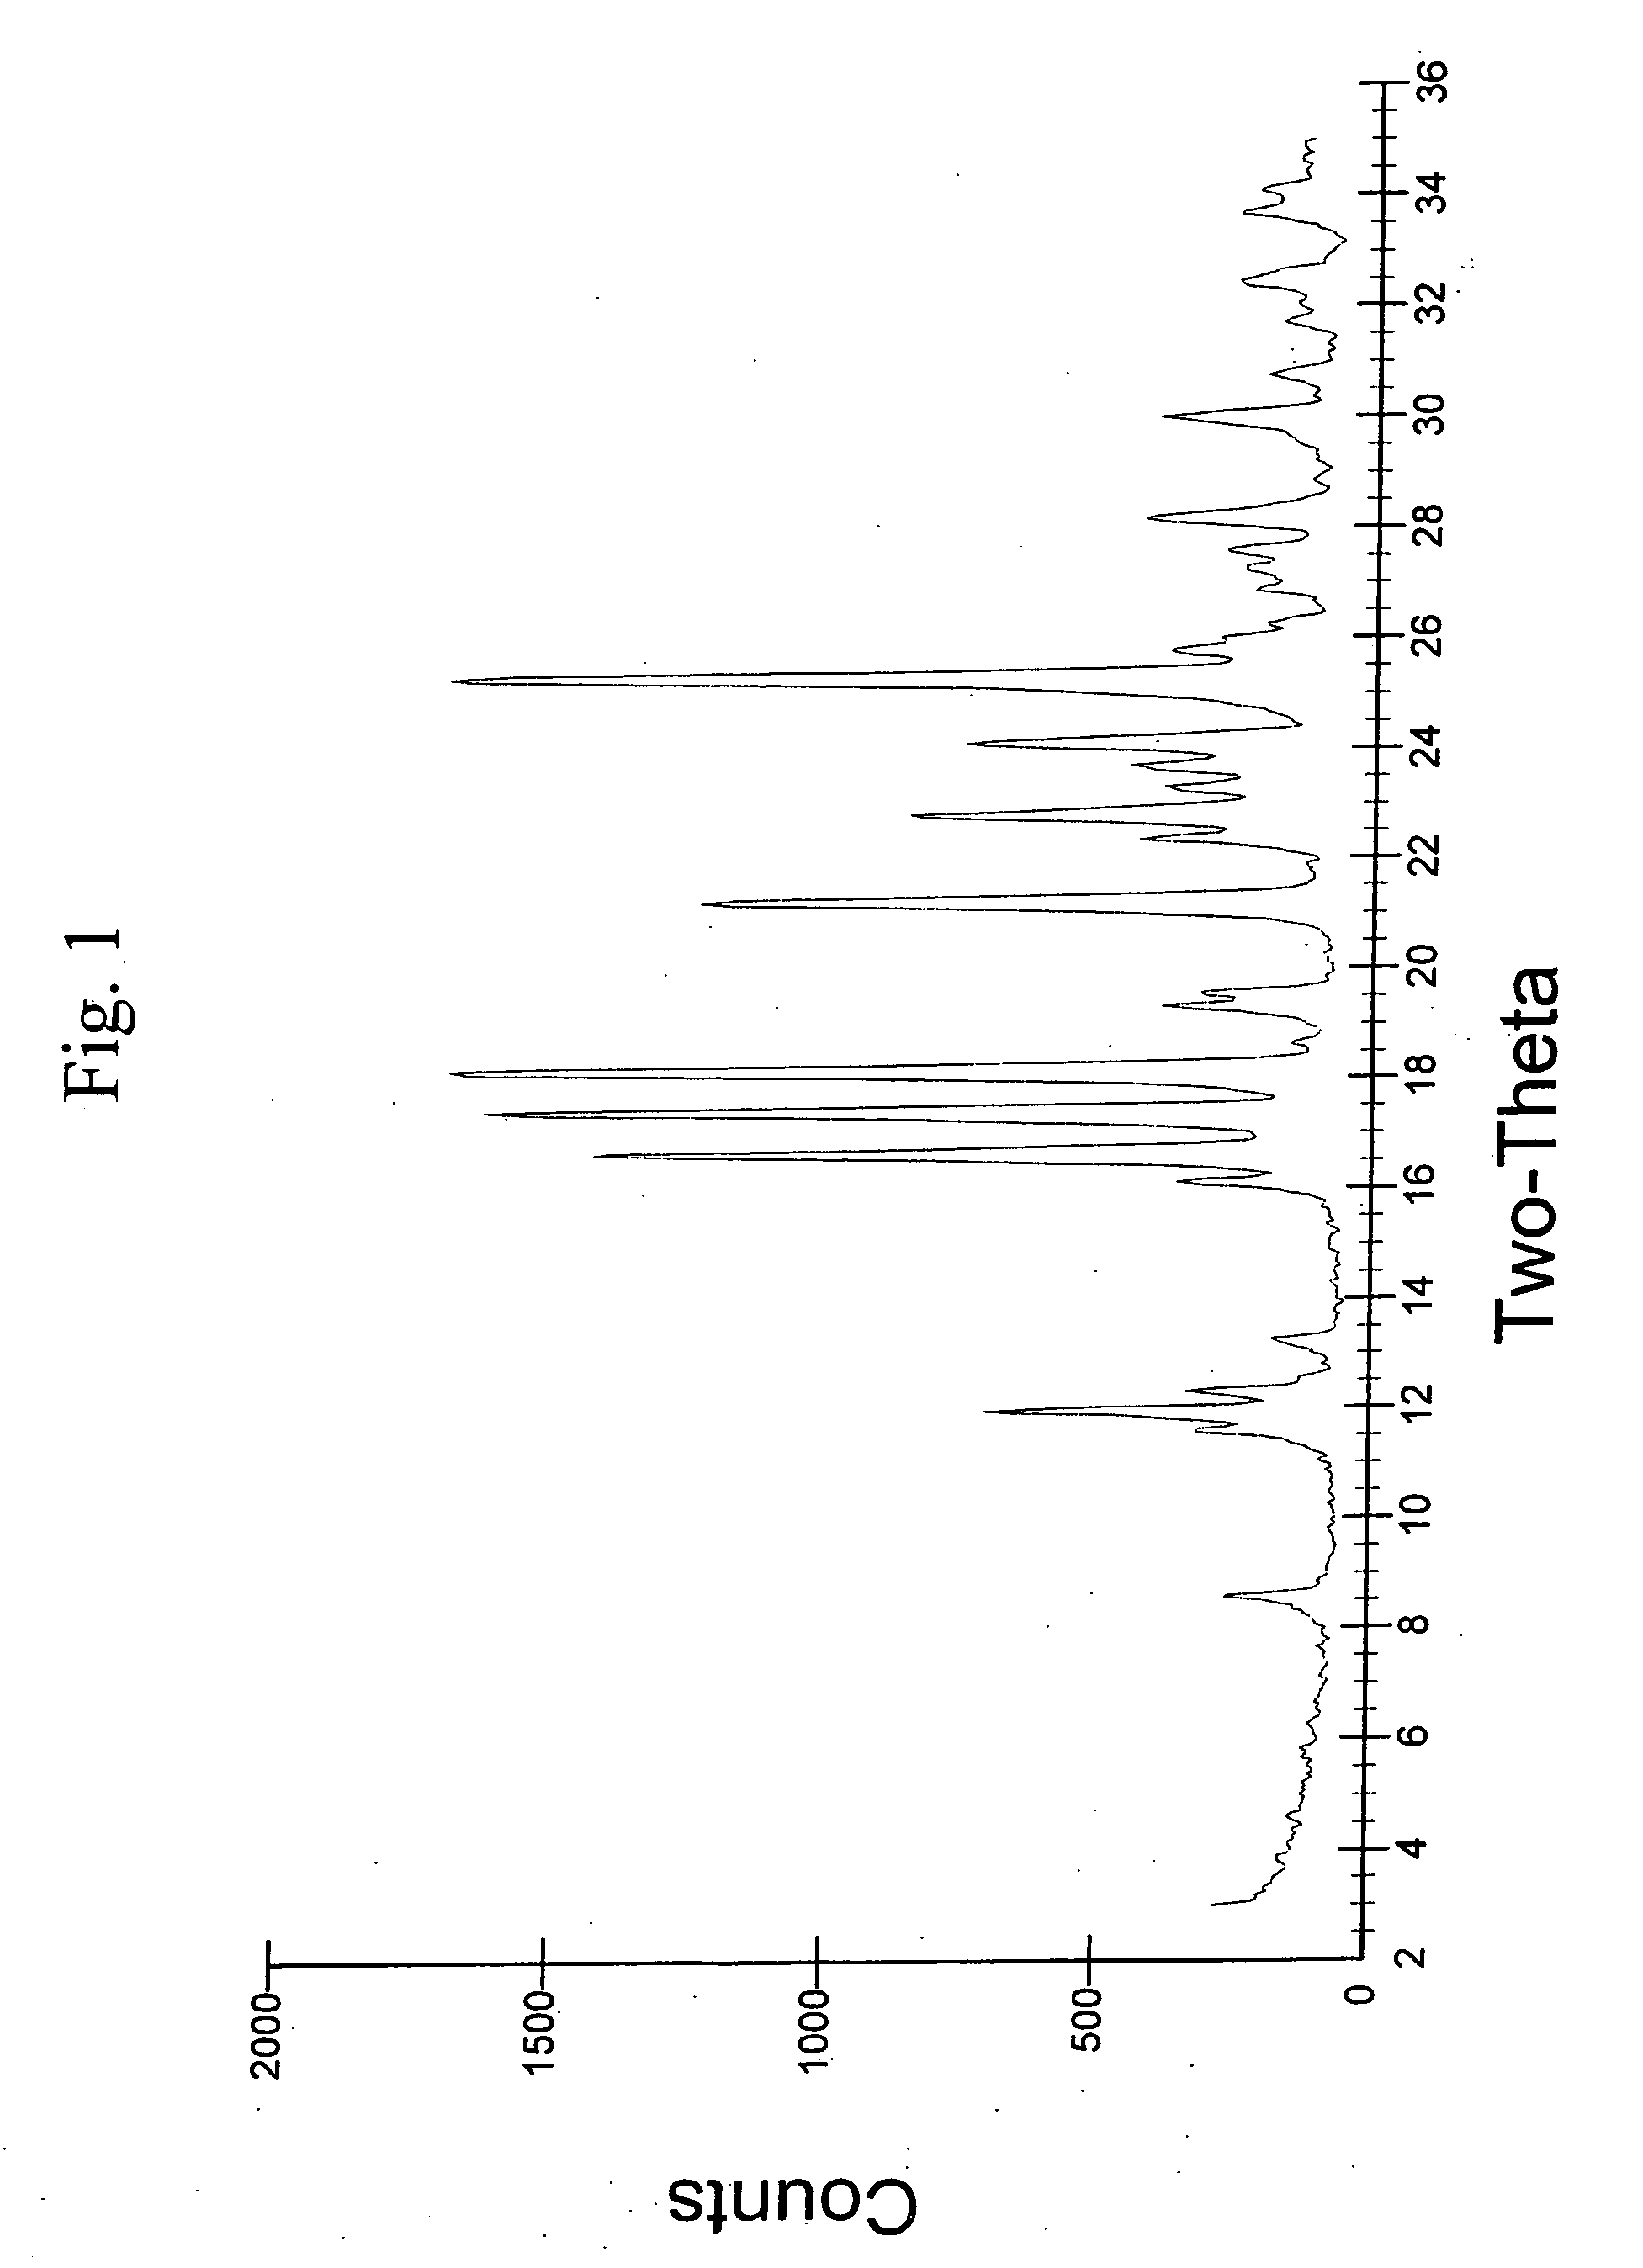 Crystalline aripiprazole salts and processes for preparation and purification thereof